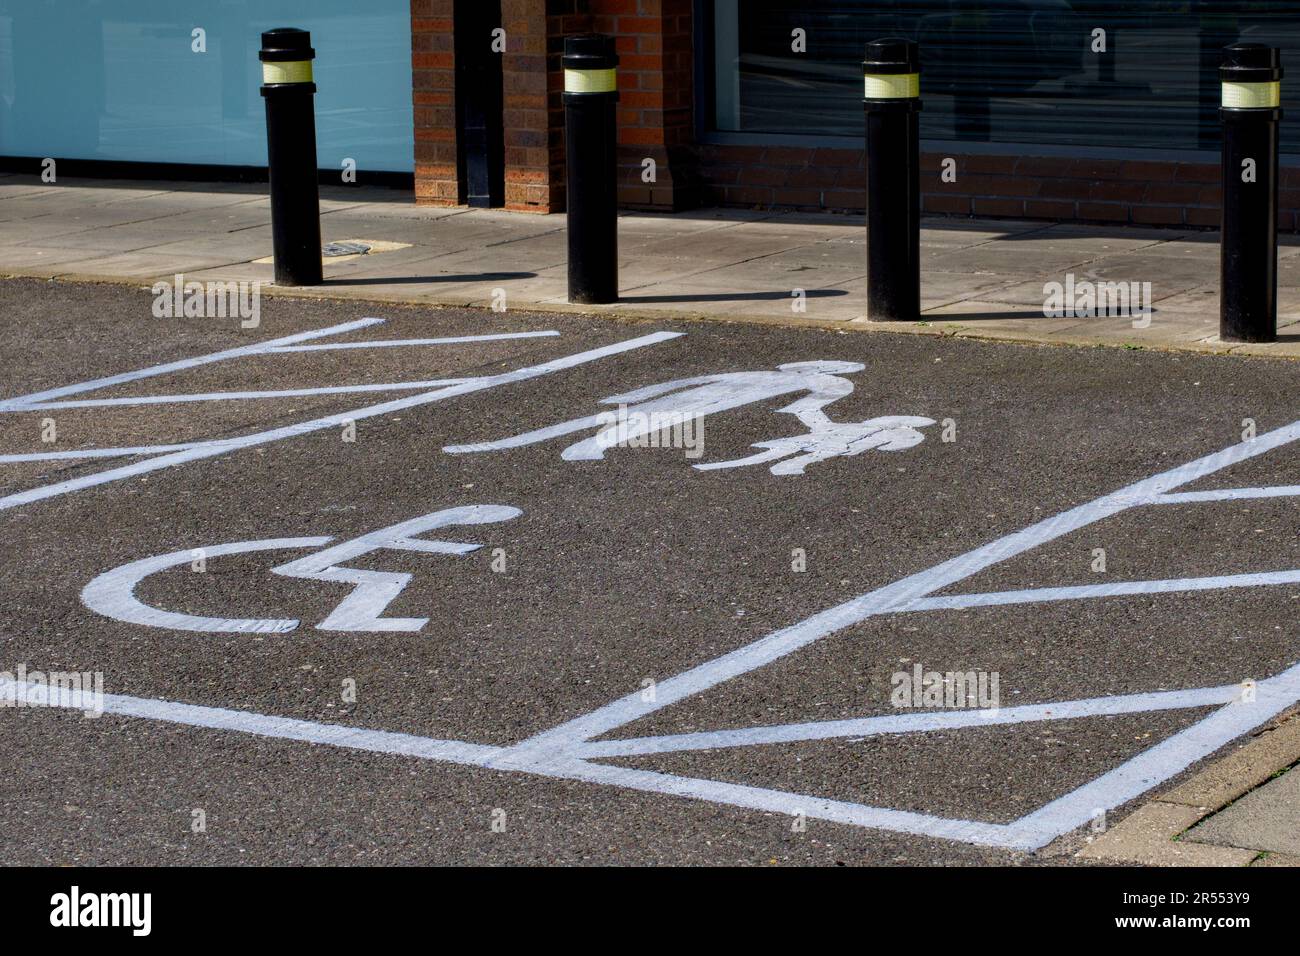 Priority parking Bays, Waterfields Shopping Park, Watford, Herts, Angleterre, ROYAUME-UNI Banque D'Images